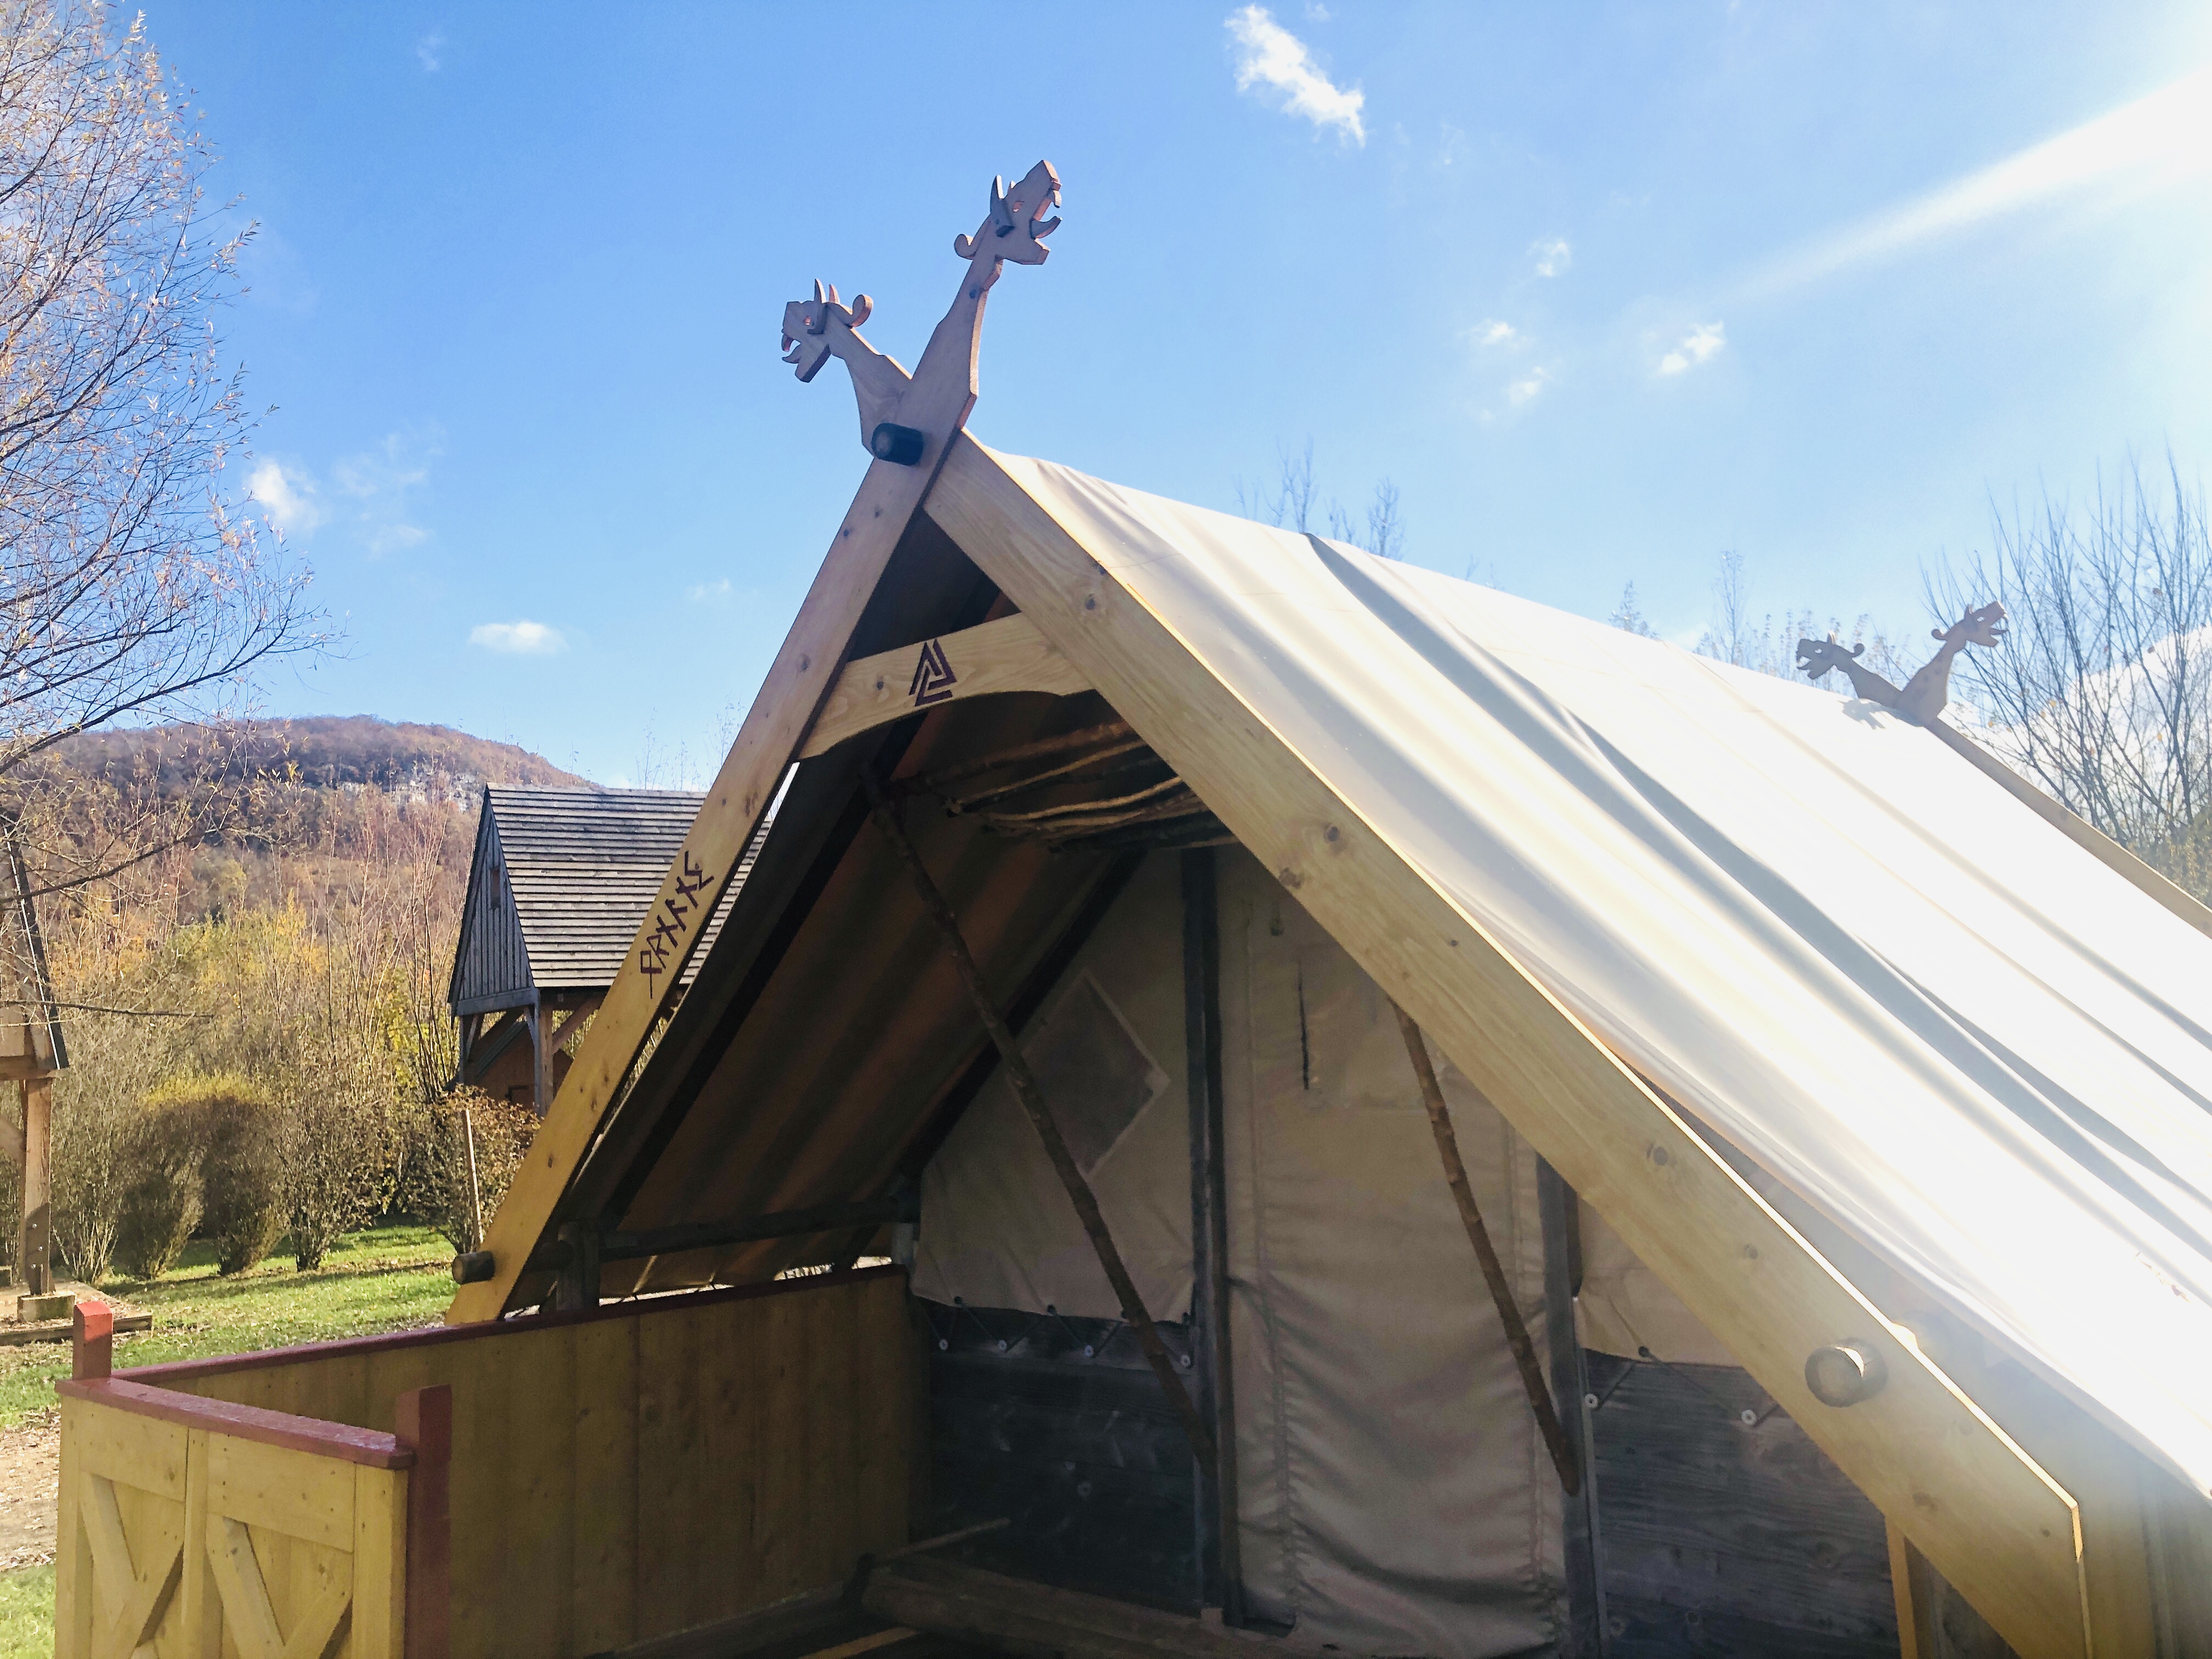 Ferietype - New! Lodge Skàli - 15M² - 2 Bedrooms - No Toilets, A Viking Style Comfort Tent! - Camping Ecologique LA ROCHE D'ULLY